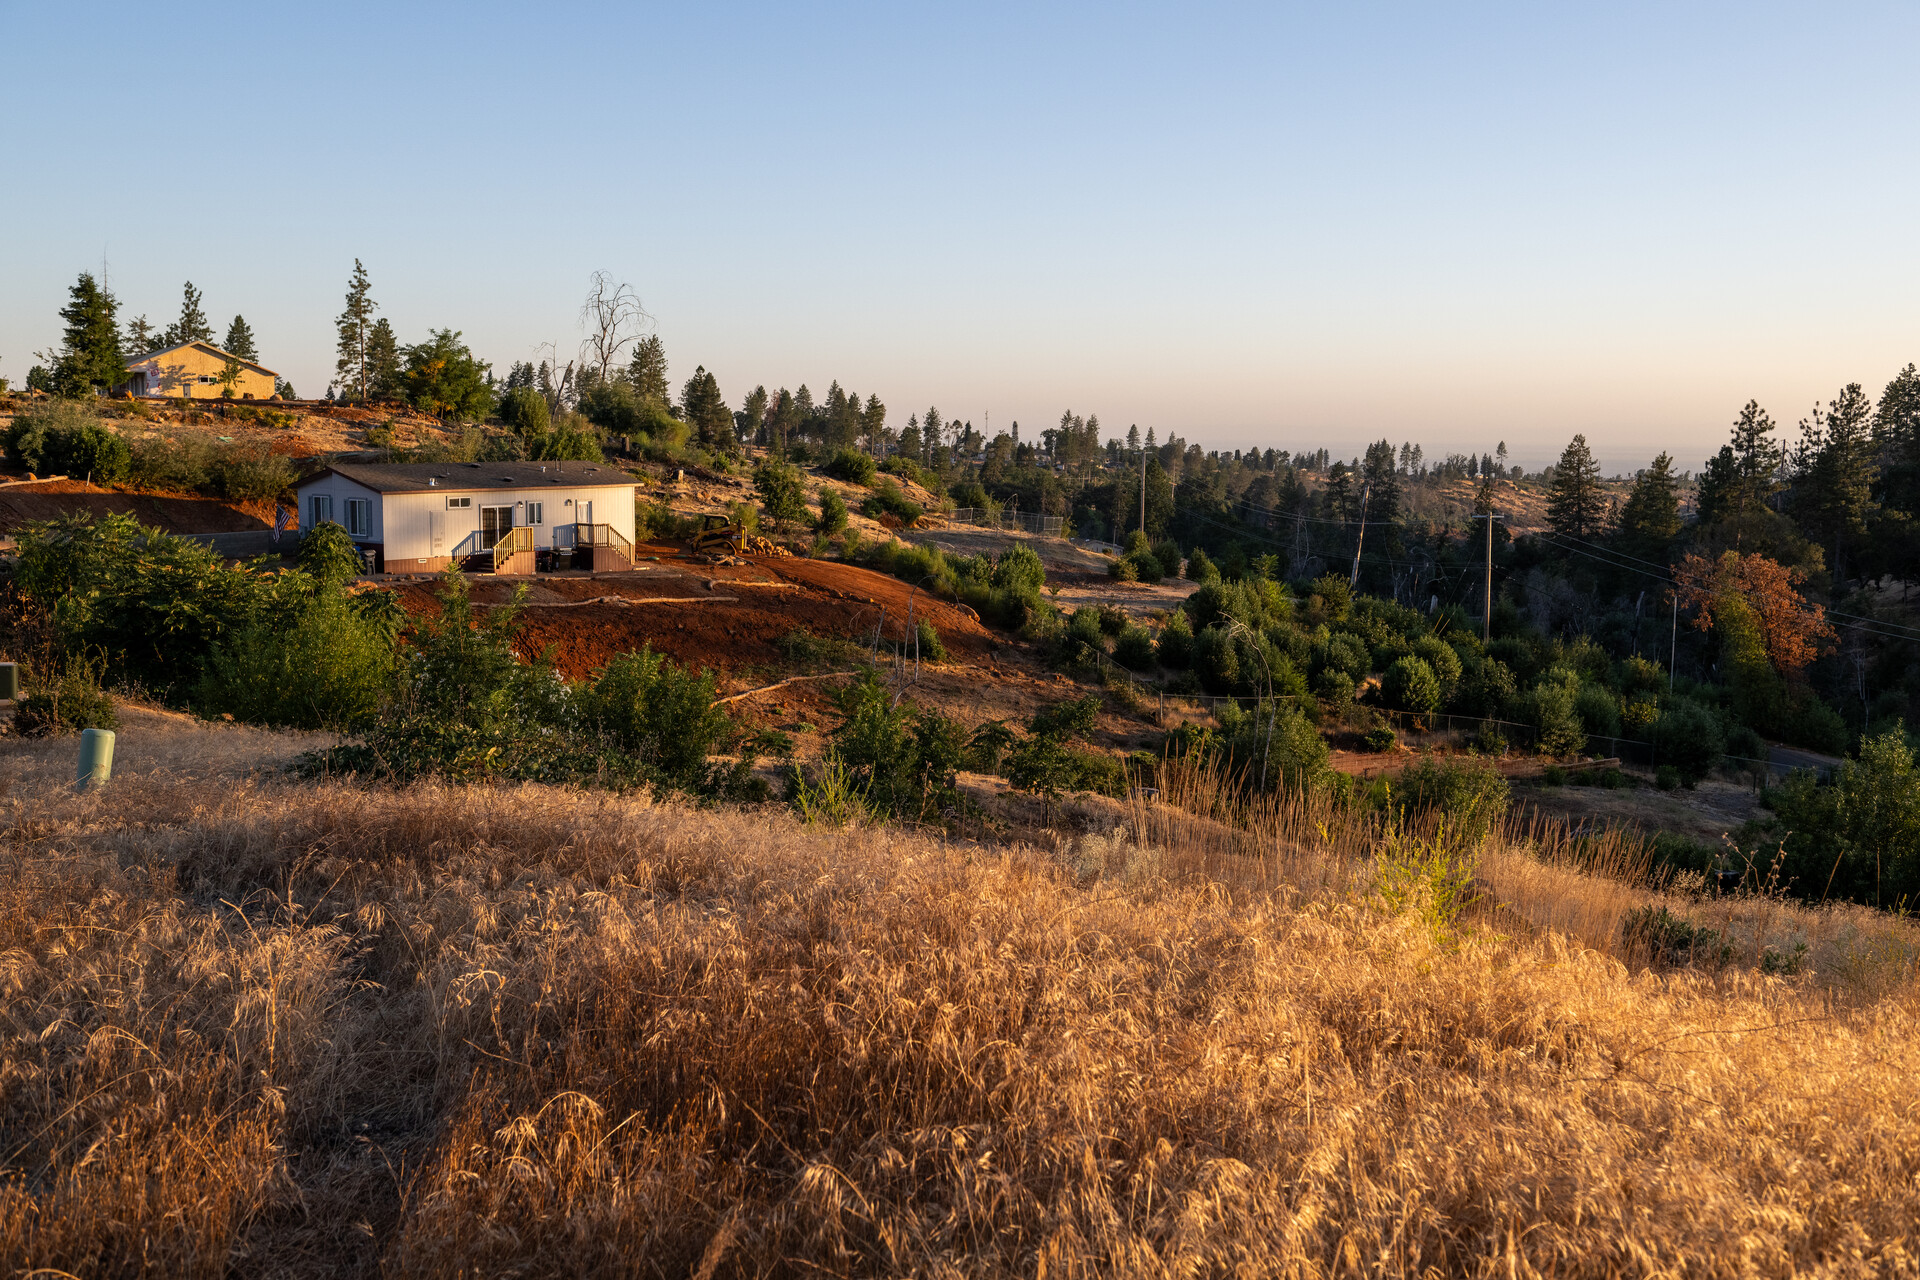 A house sits on a hillside dotted with green shrubs and dry grasses in the foreground.